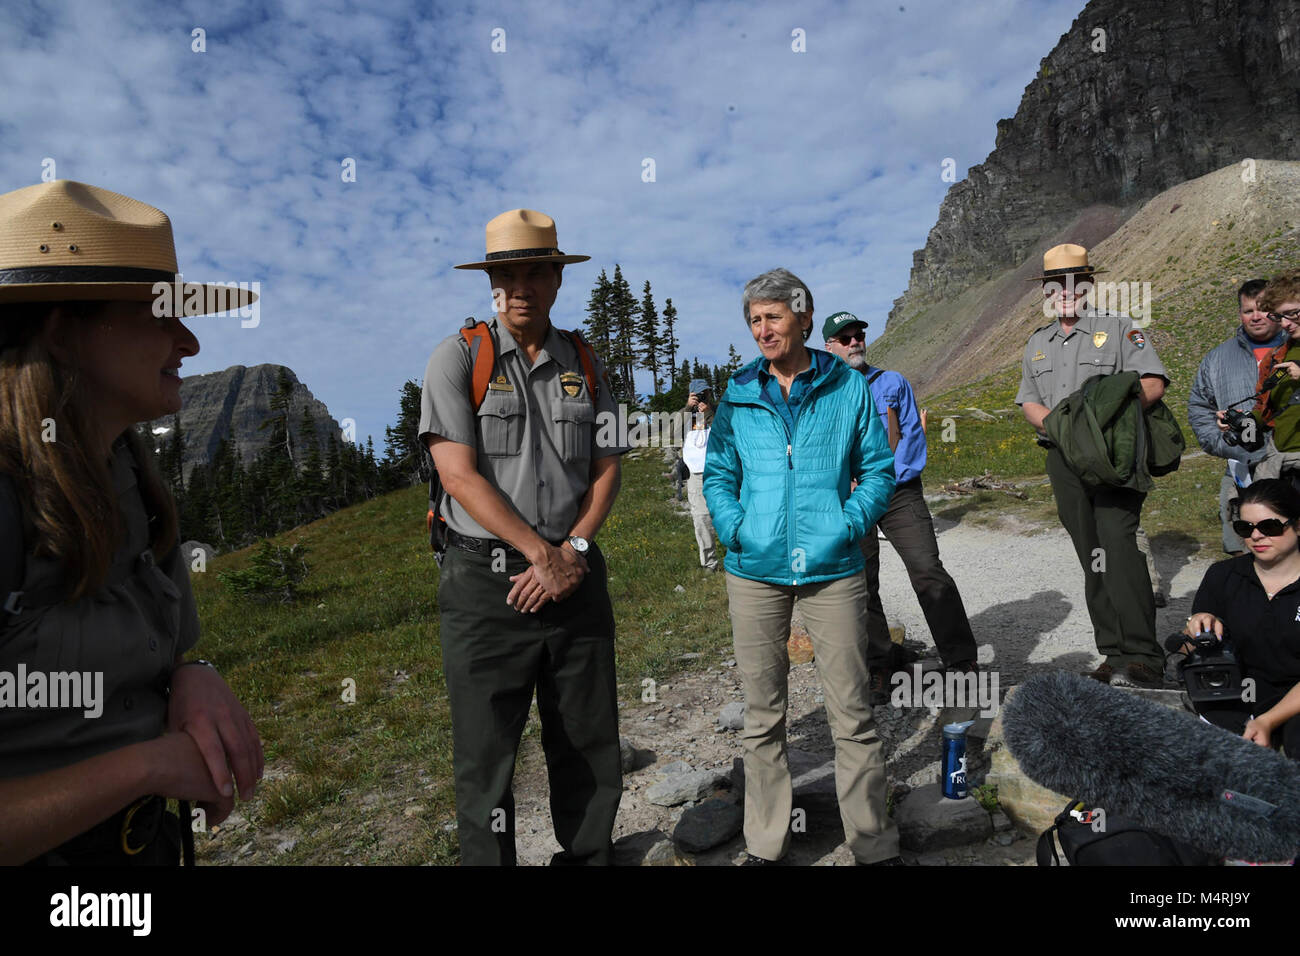 Secretary Jewell visits Glacier National Park. Meets Rangers and gets involved with activities. Stock Photo